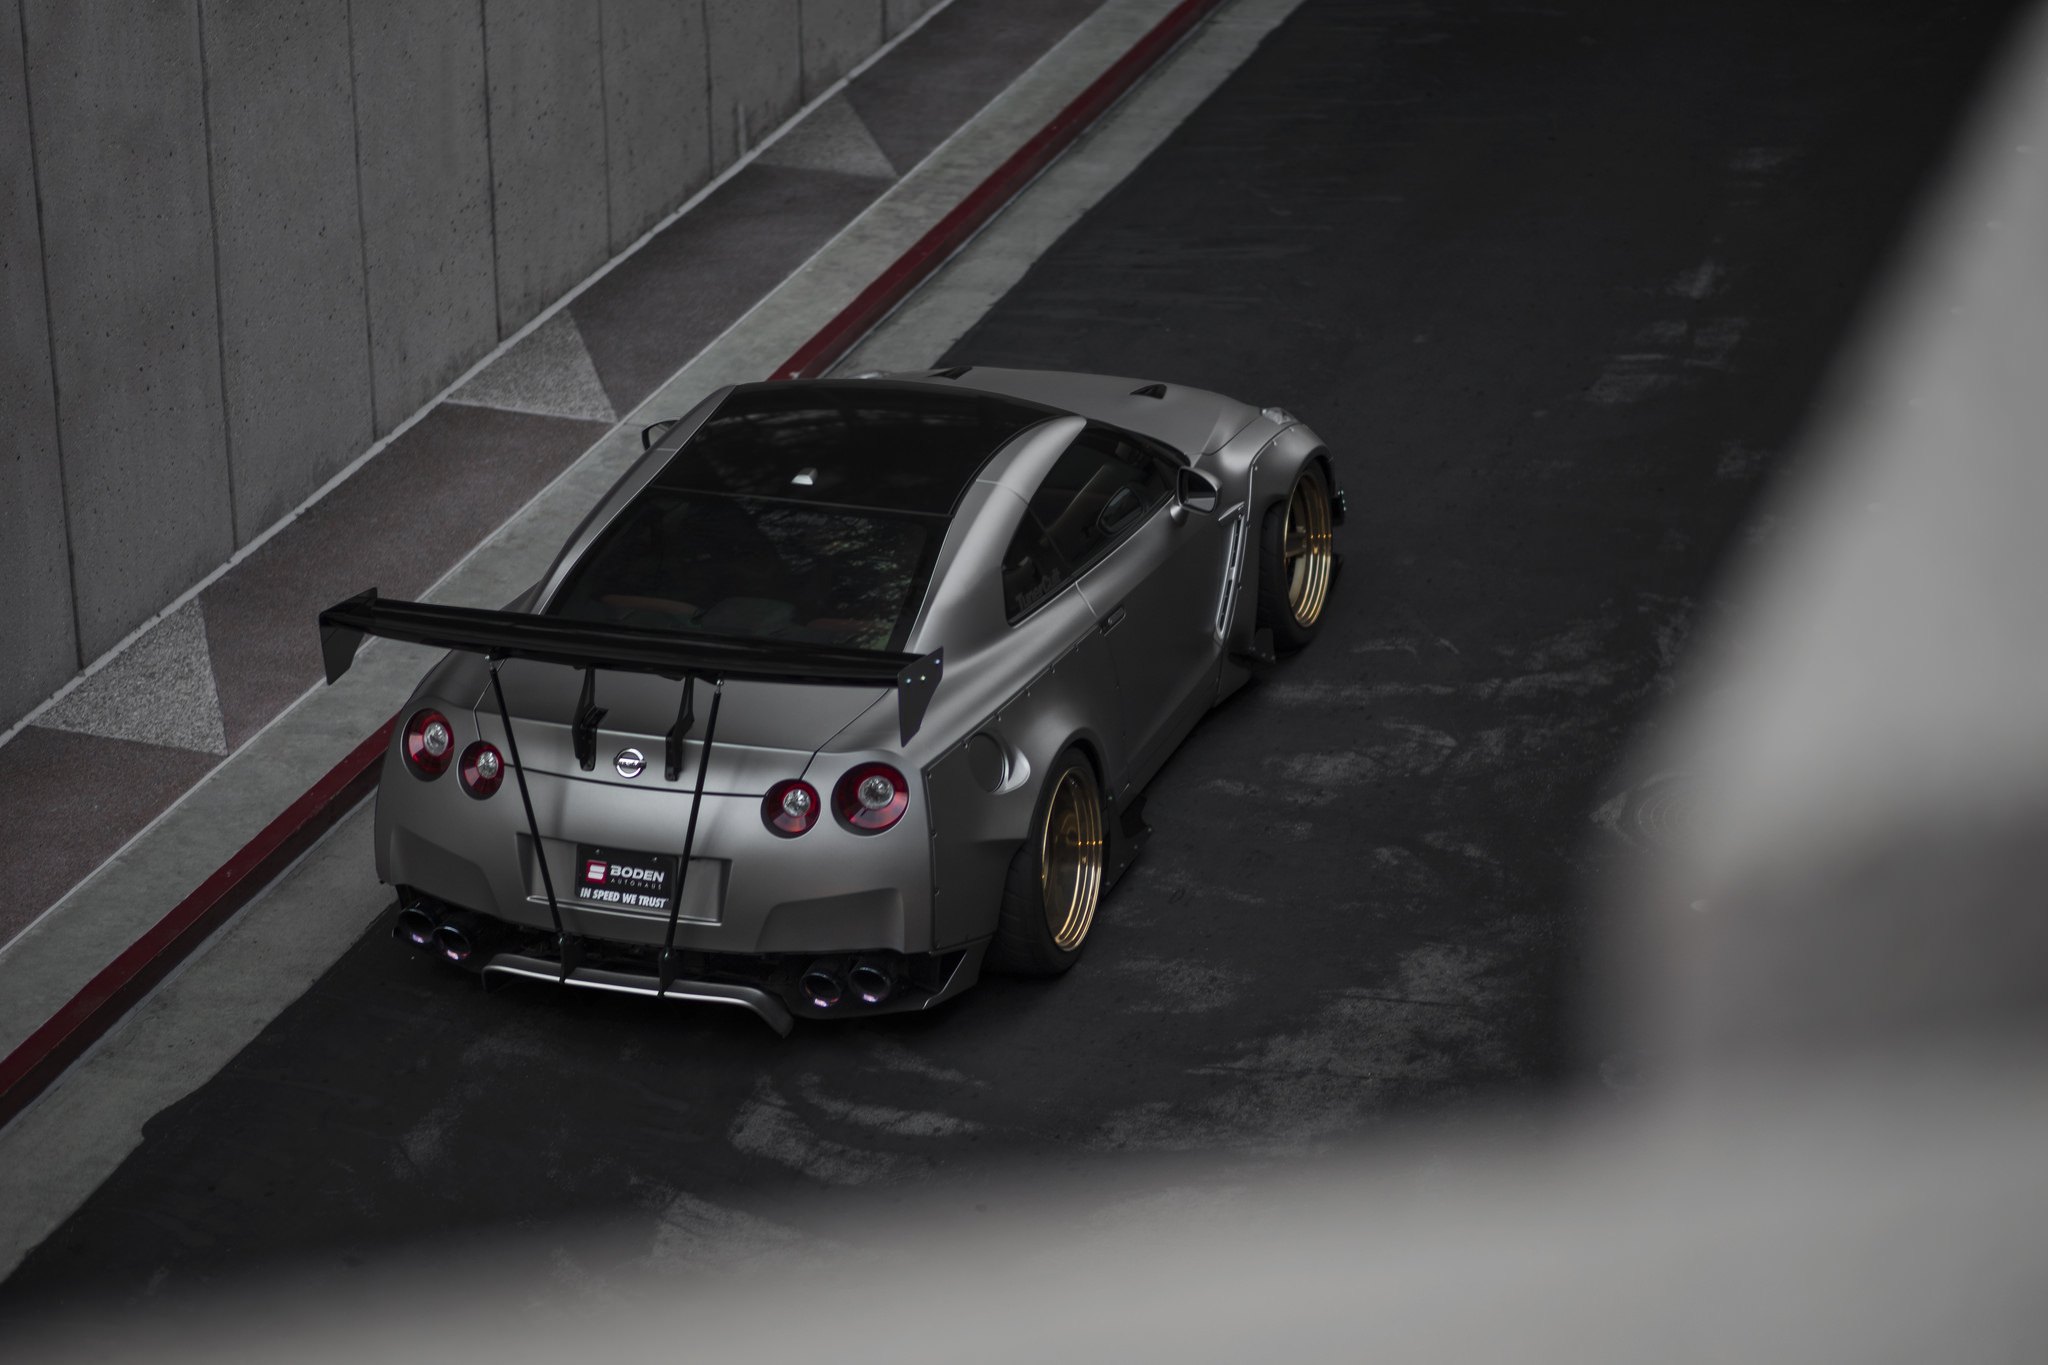 Red Smoke LED Taillights on Gray Nissan GT-R - Photo by Alex Esperon